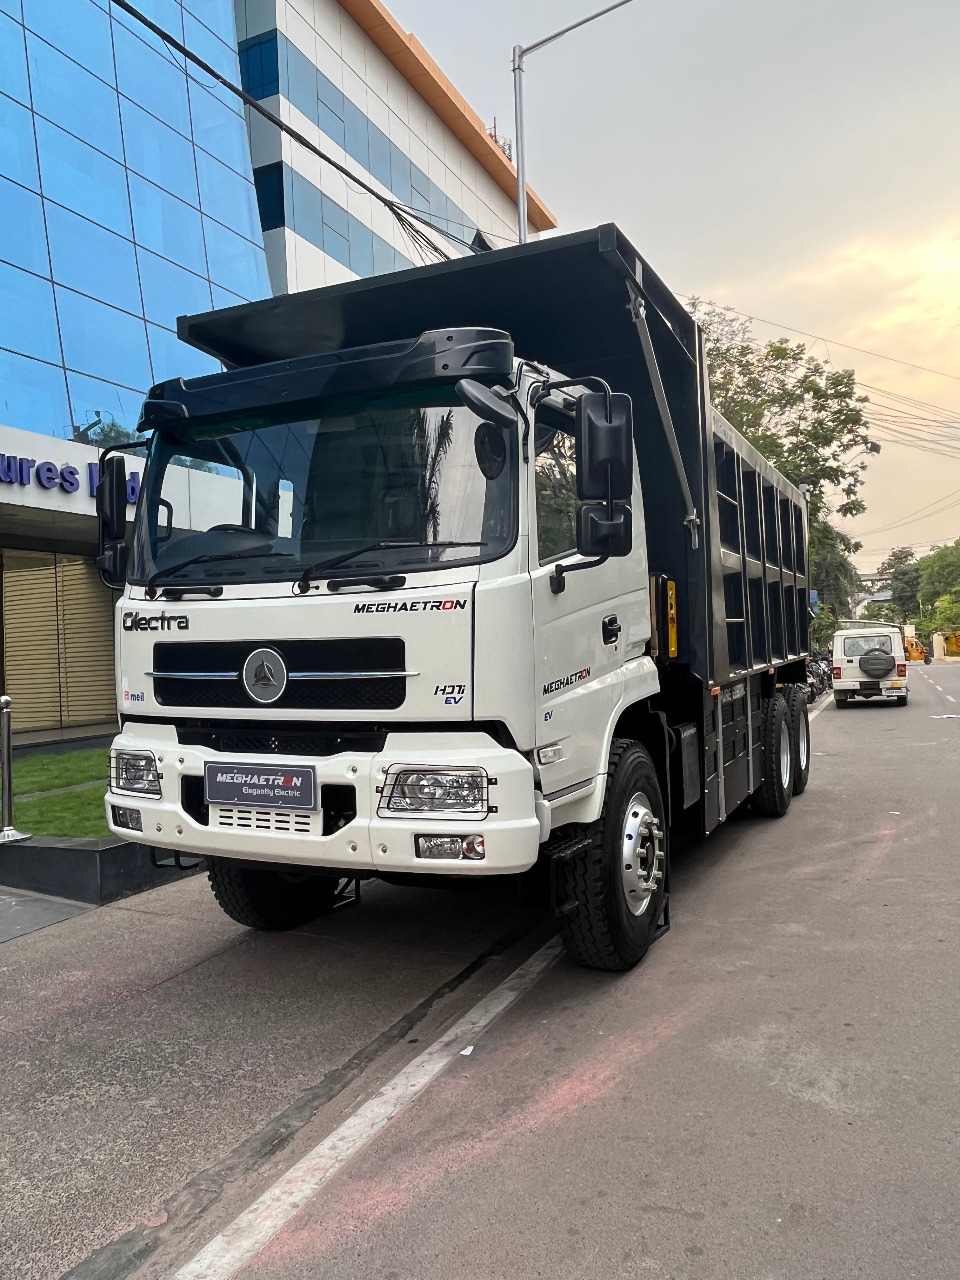 Olectra launches heavy-duty Electric truck trials | Global Prime News